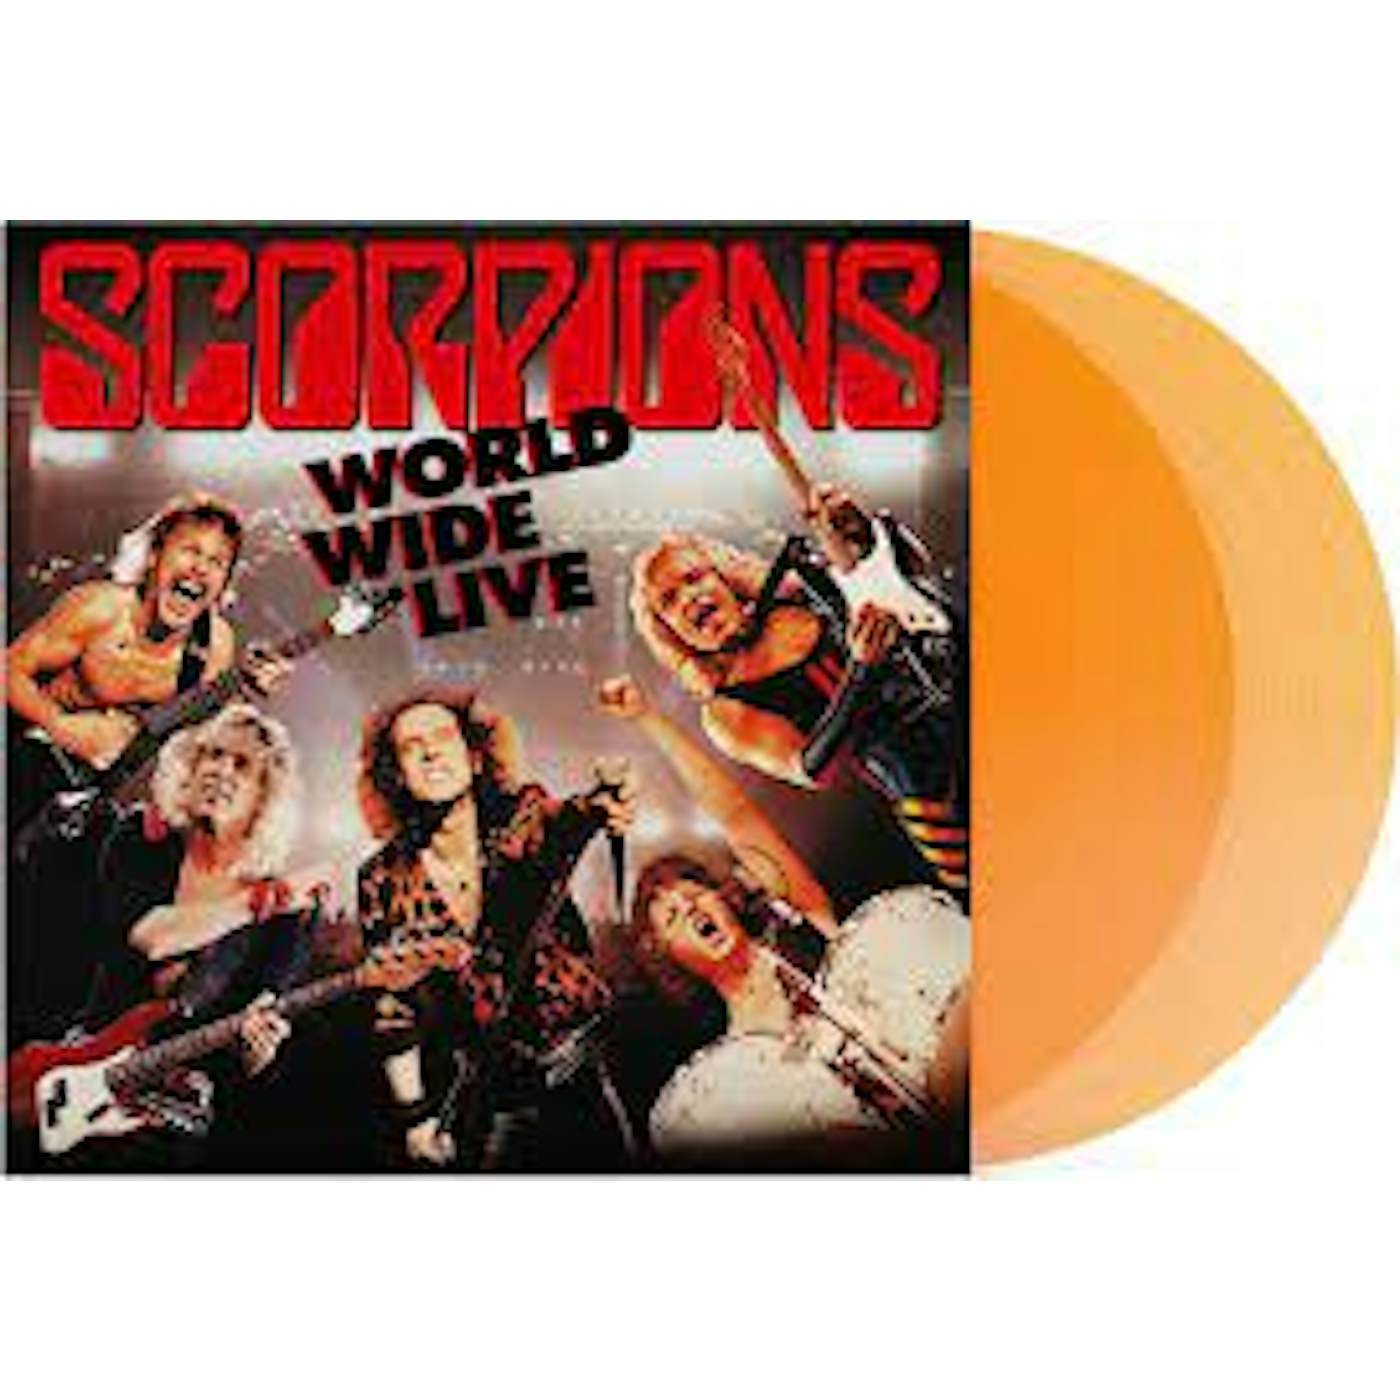 Scorpions - World Wide Live Limited Edition